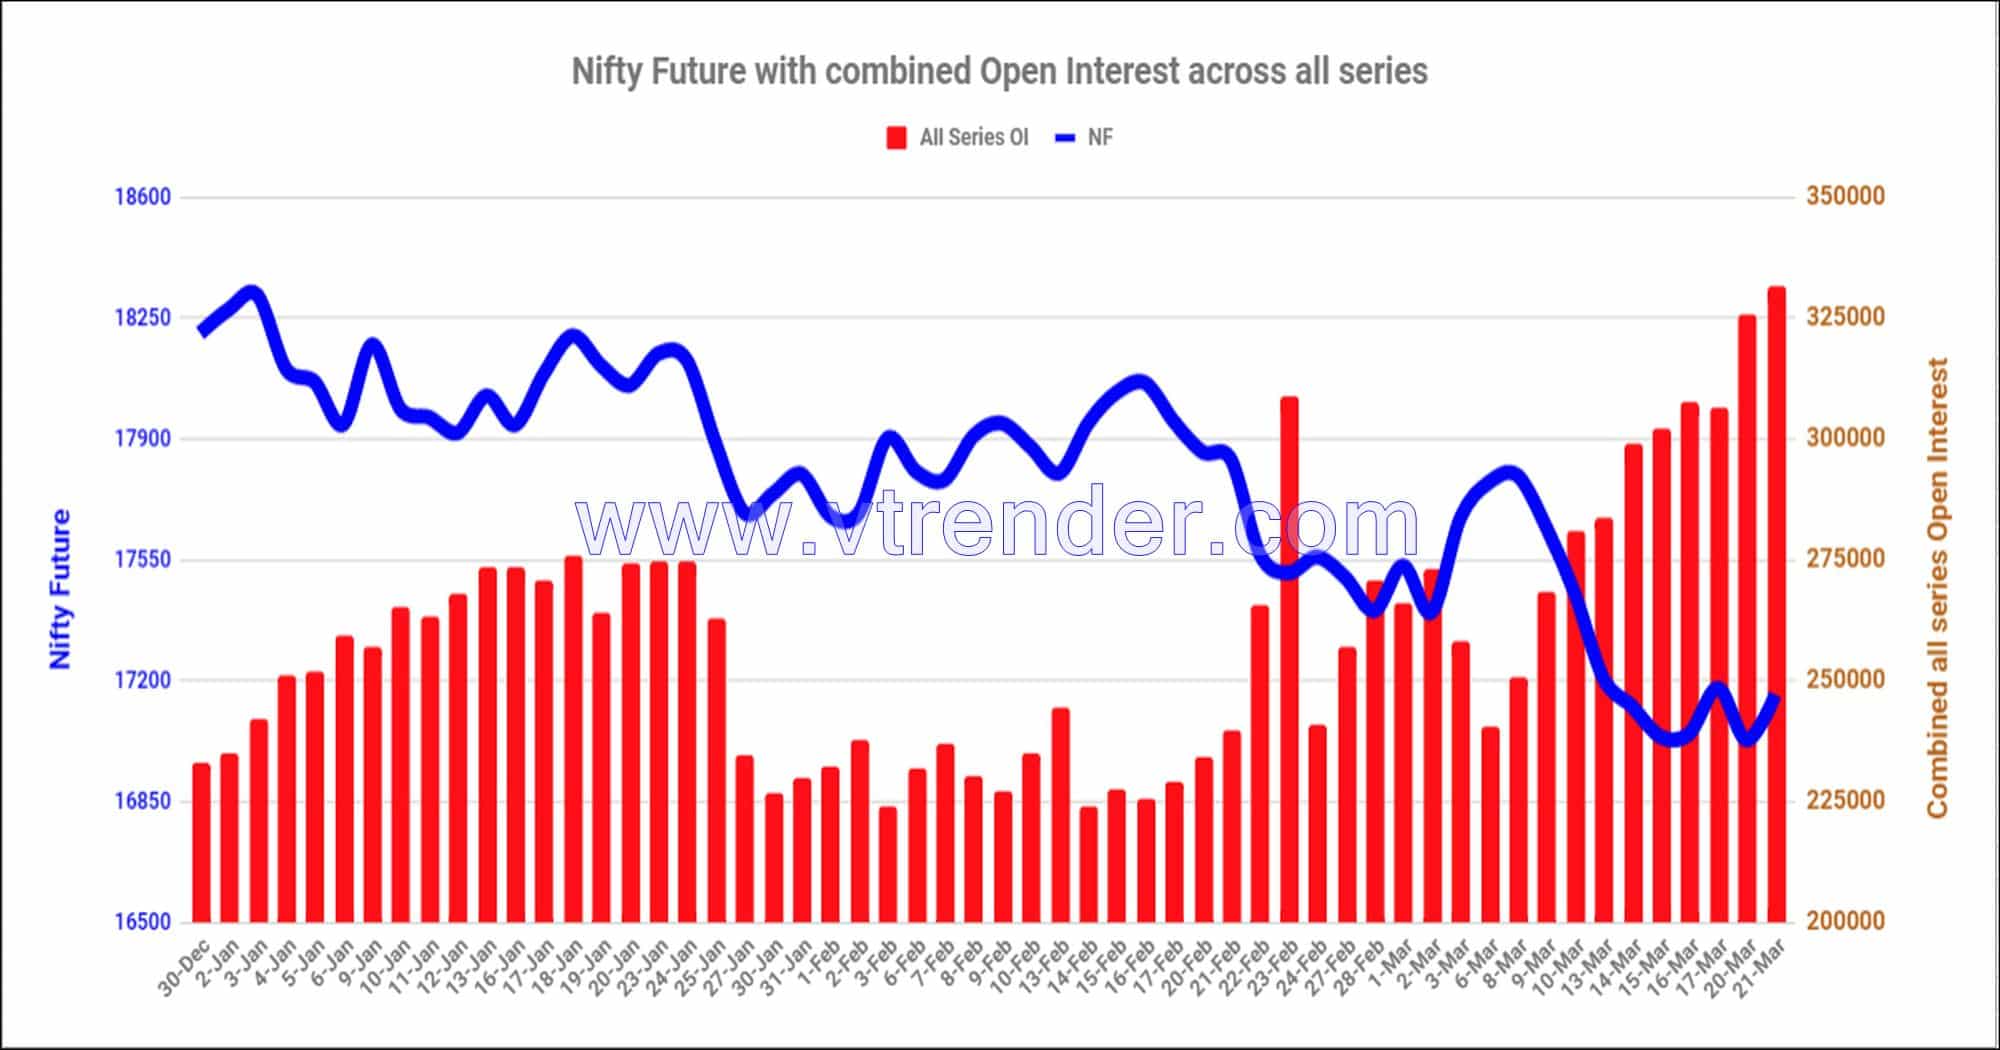 Nf21Mar Nifty And Banknifty Futures With All Series Combined Open Interest – 21St Mar 2023 Banknifty, Nifty, Open Interest